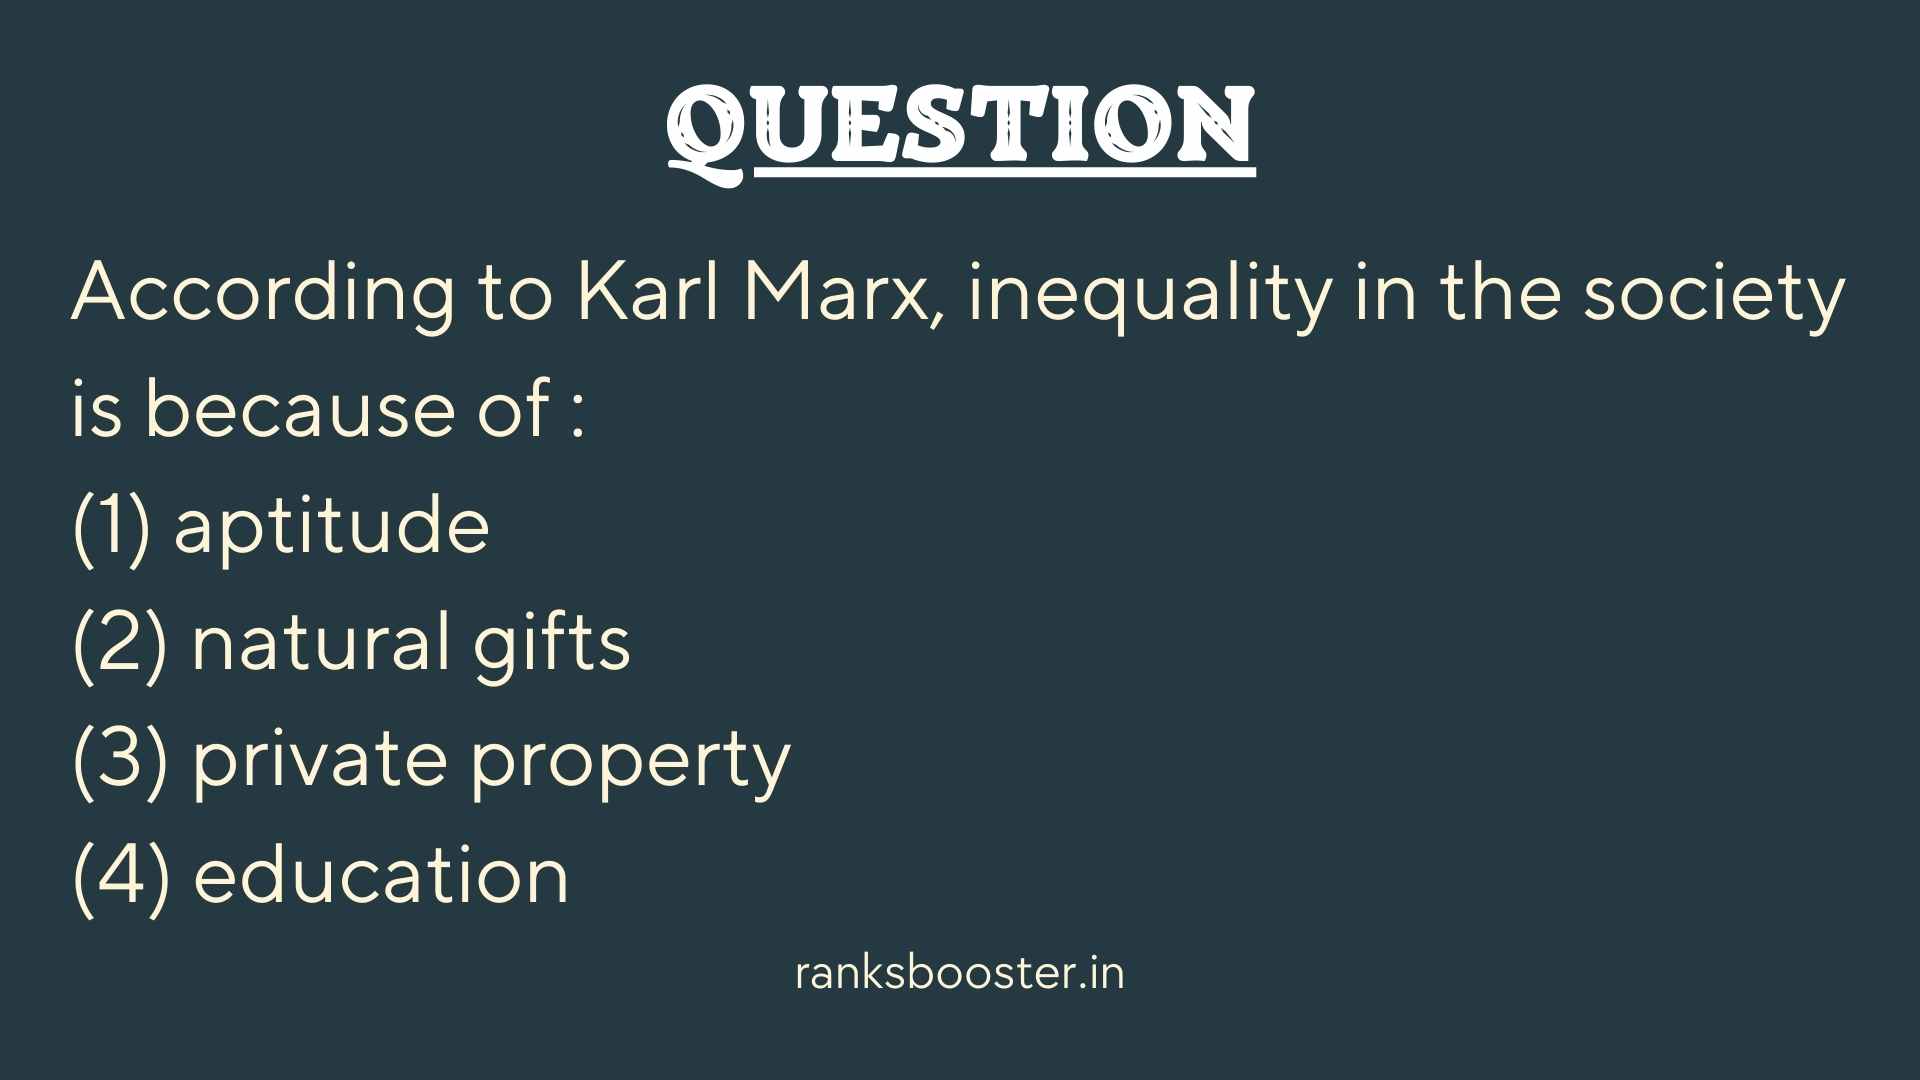 According to Karl Marx, inequality in the society is because of